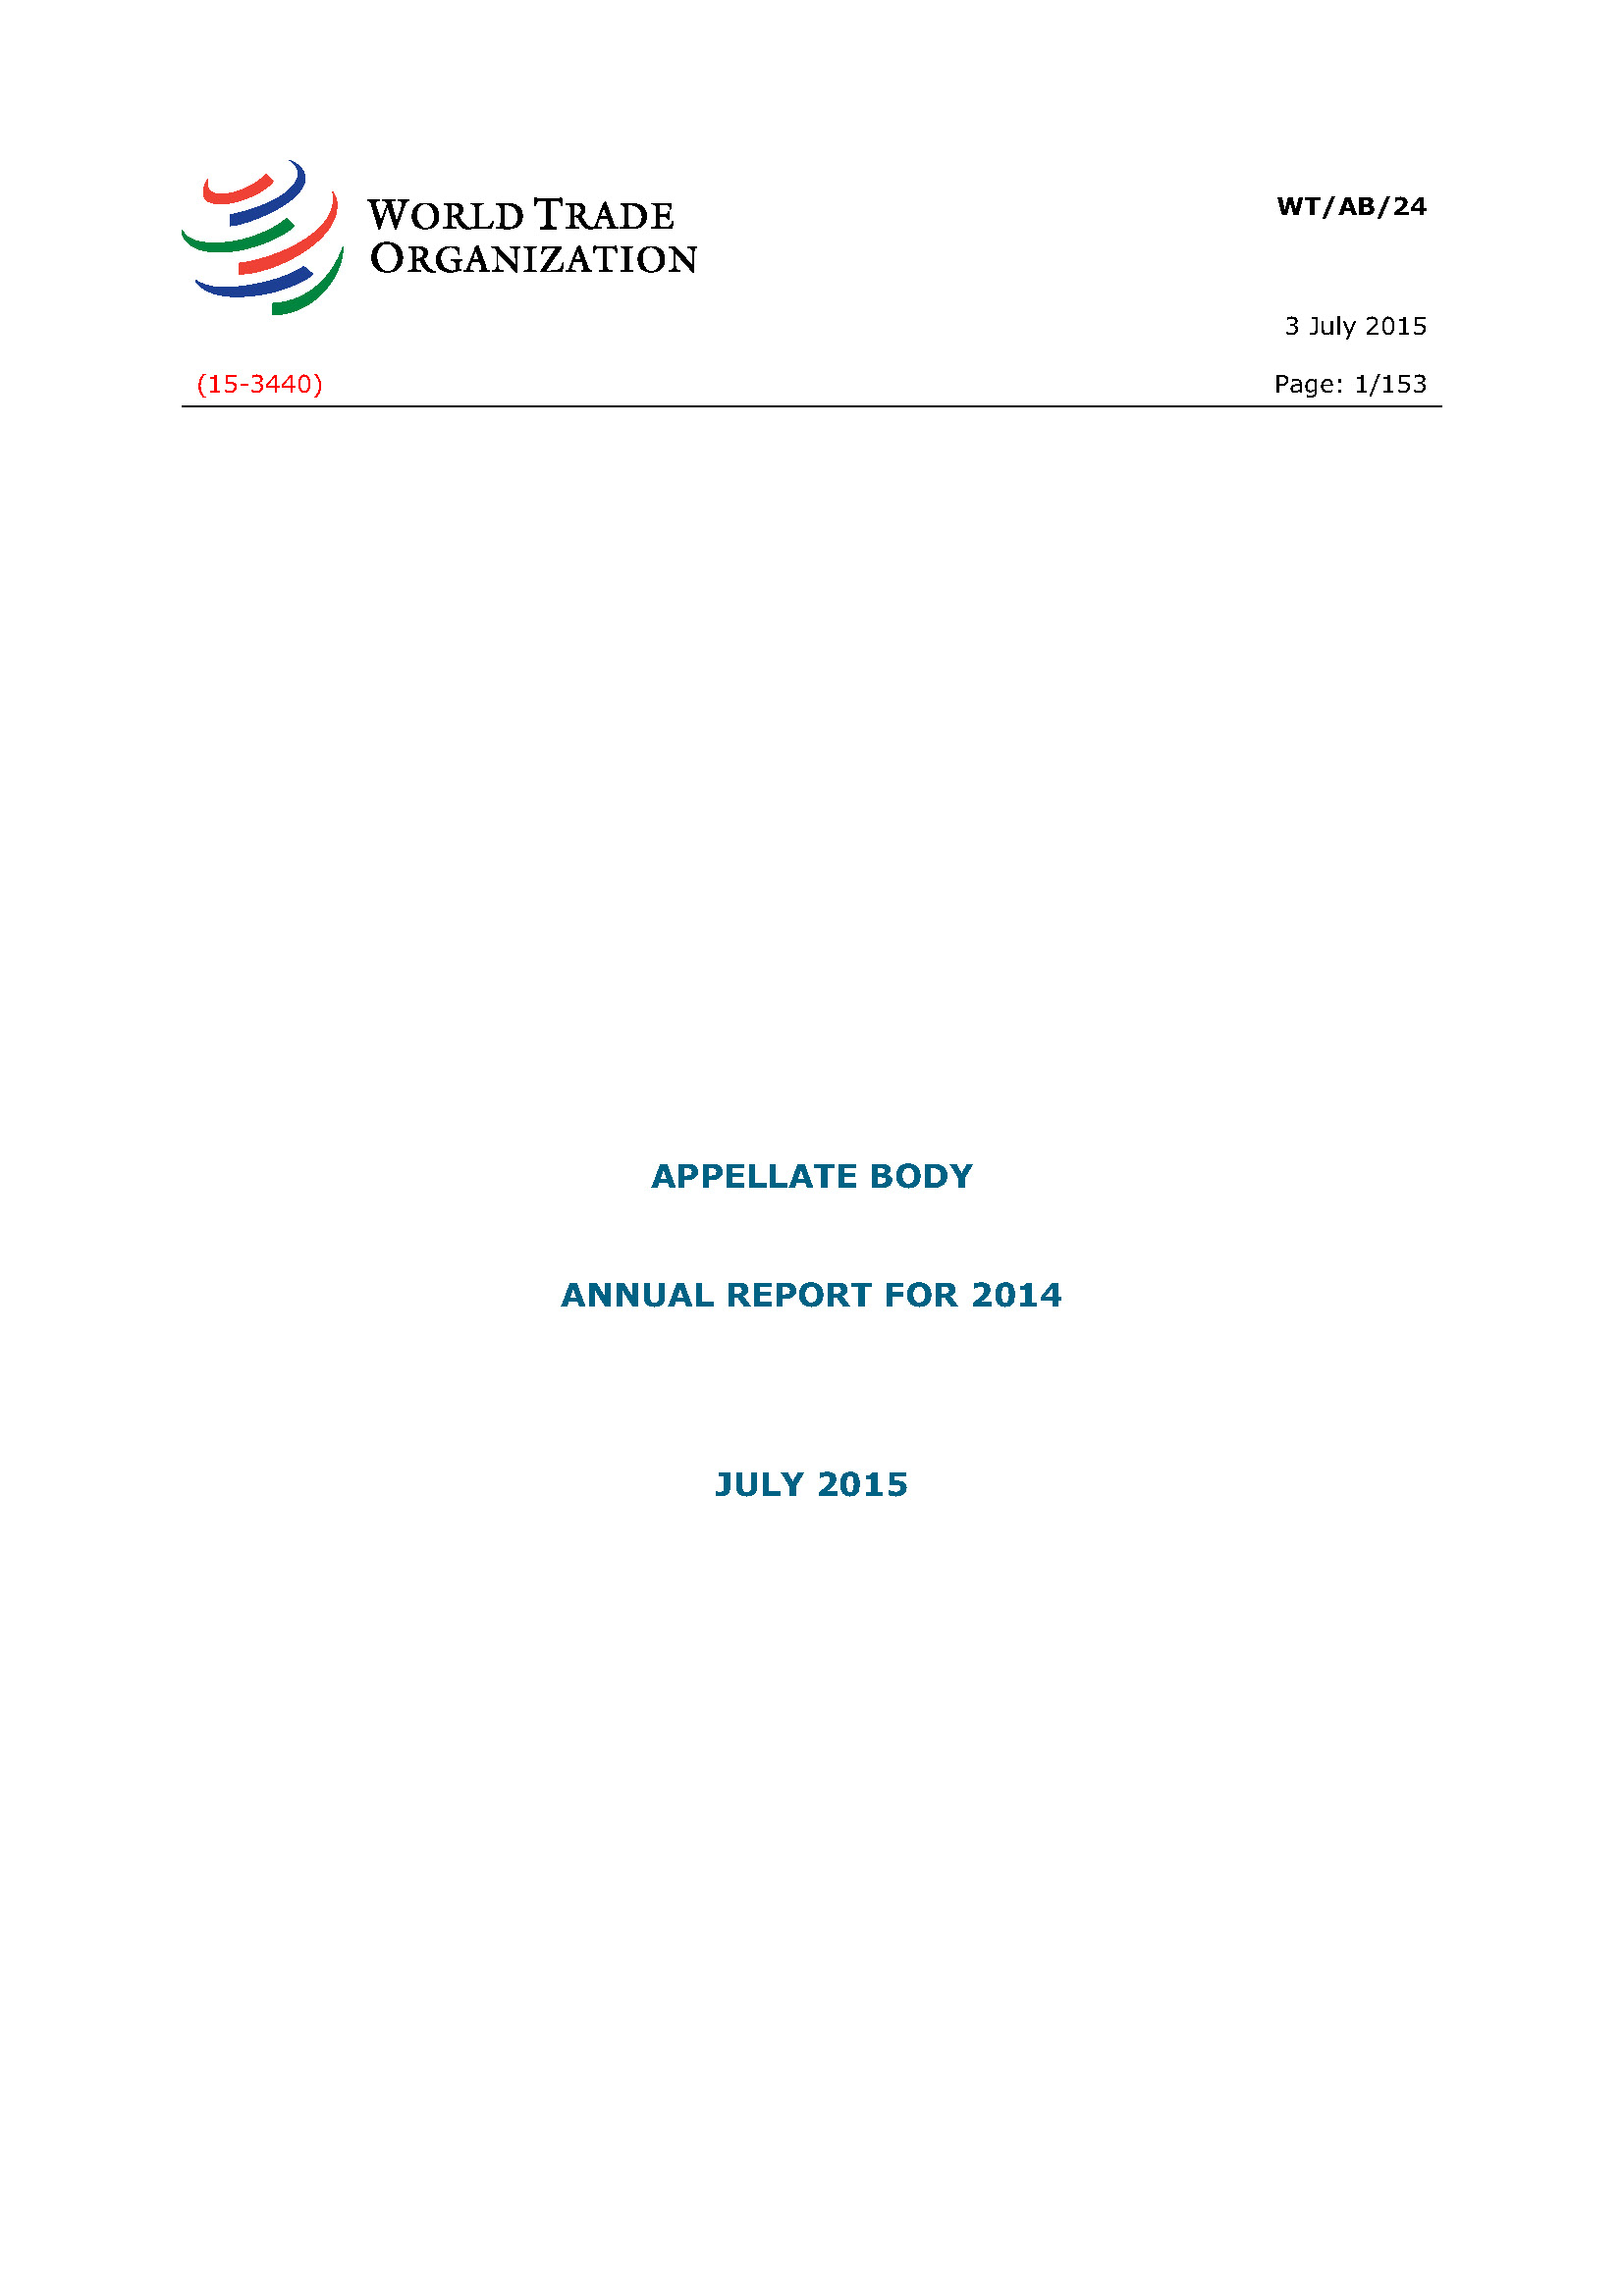 image of Appellate Body annual report for 2014